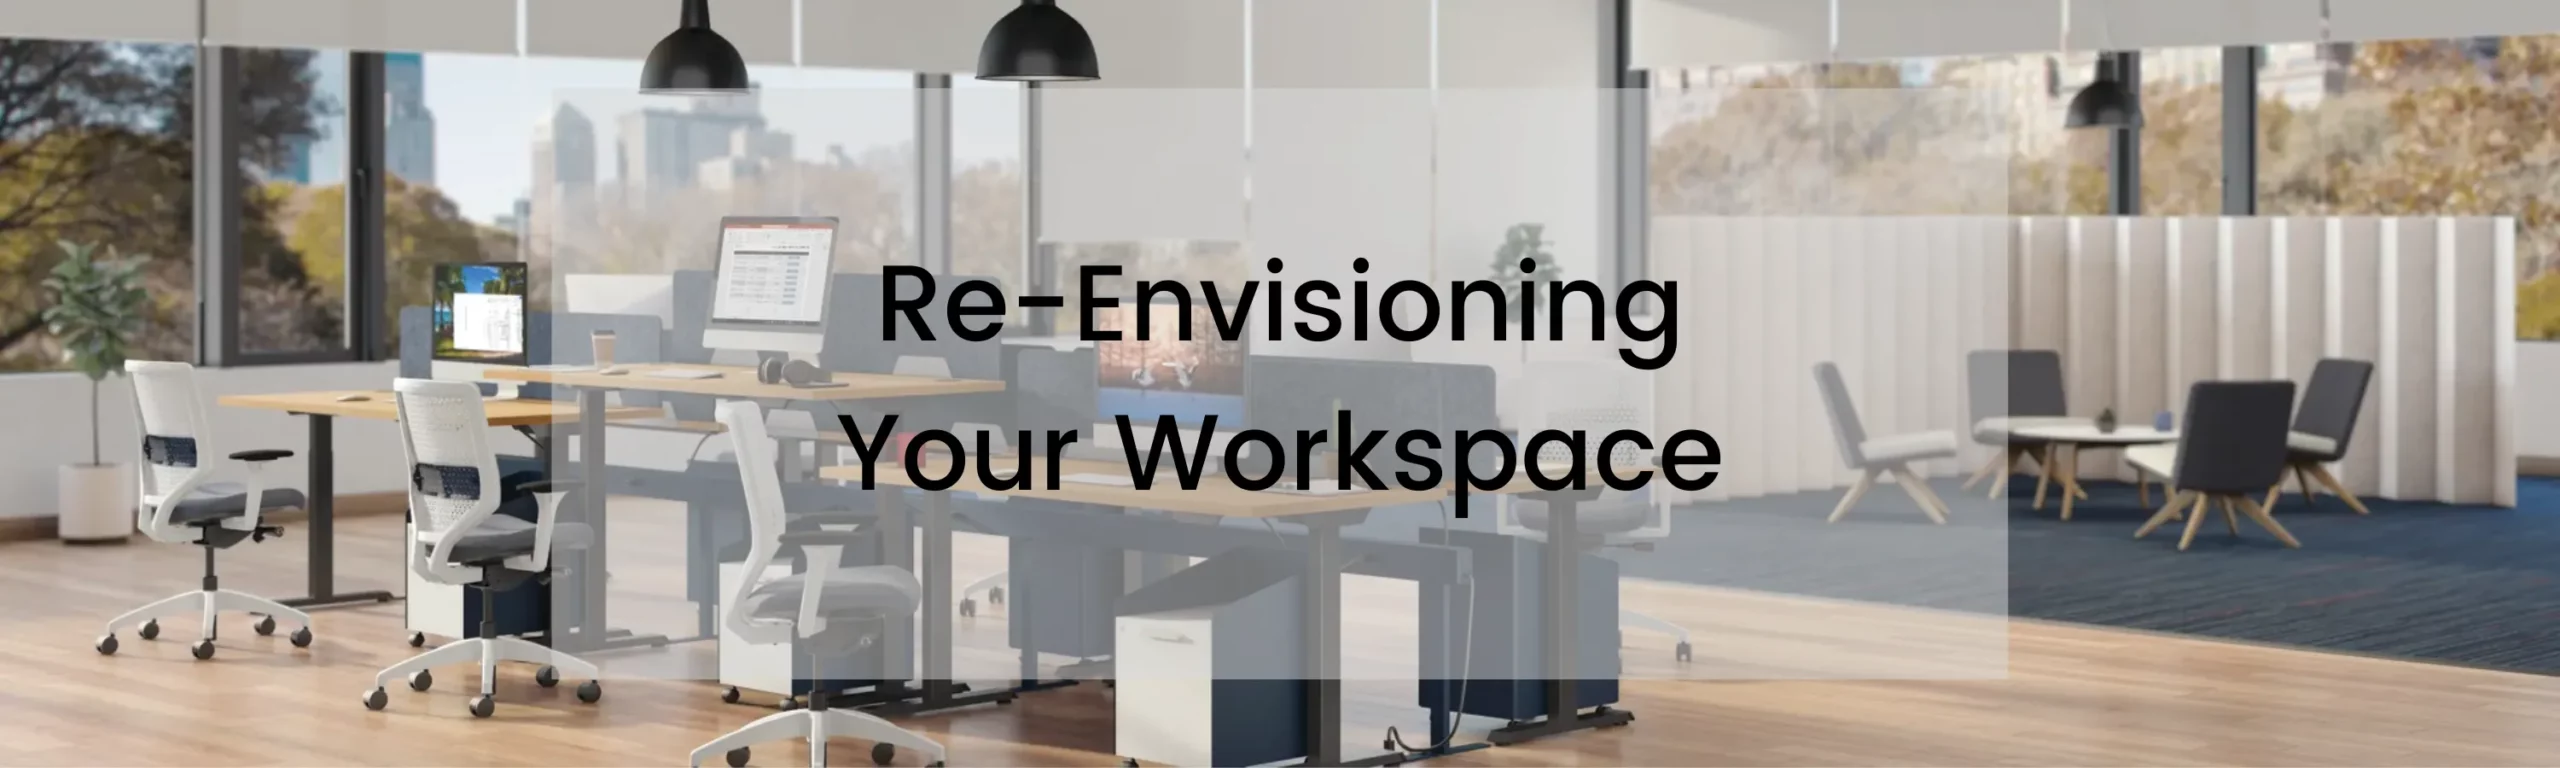 Re-envision your workspace Banner 2